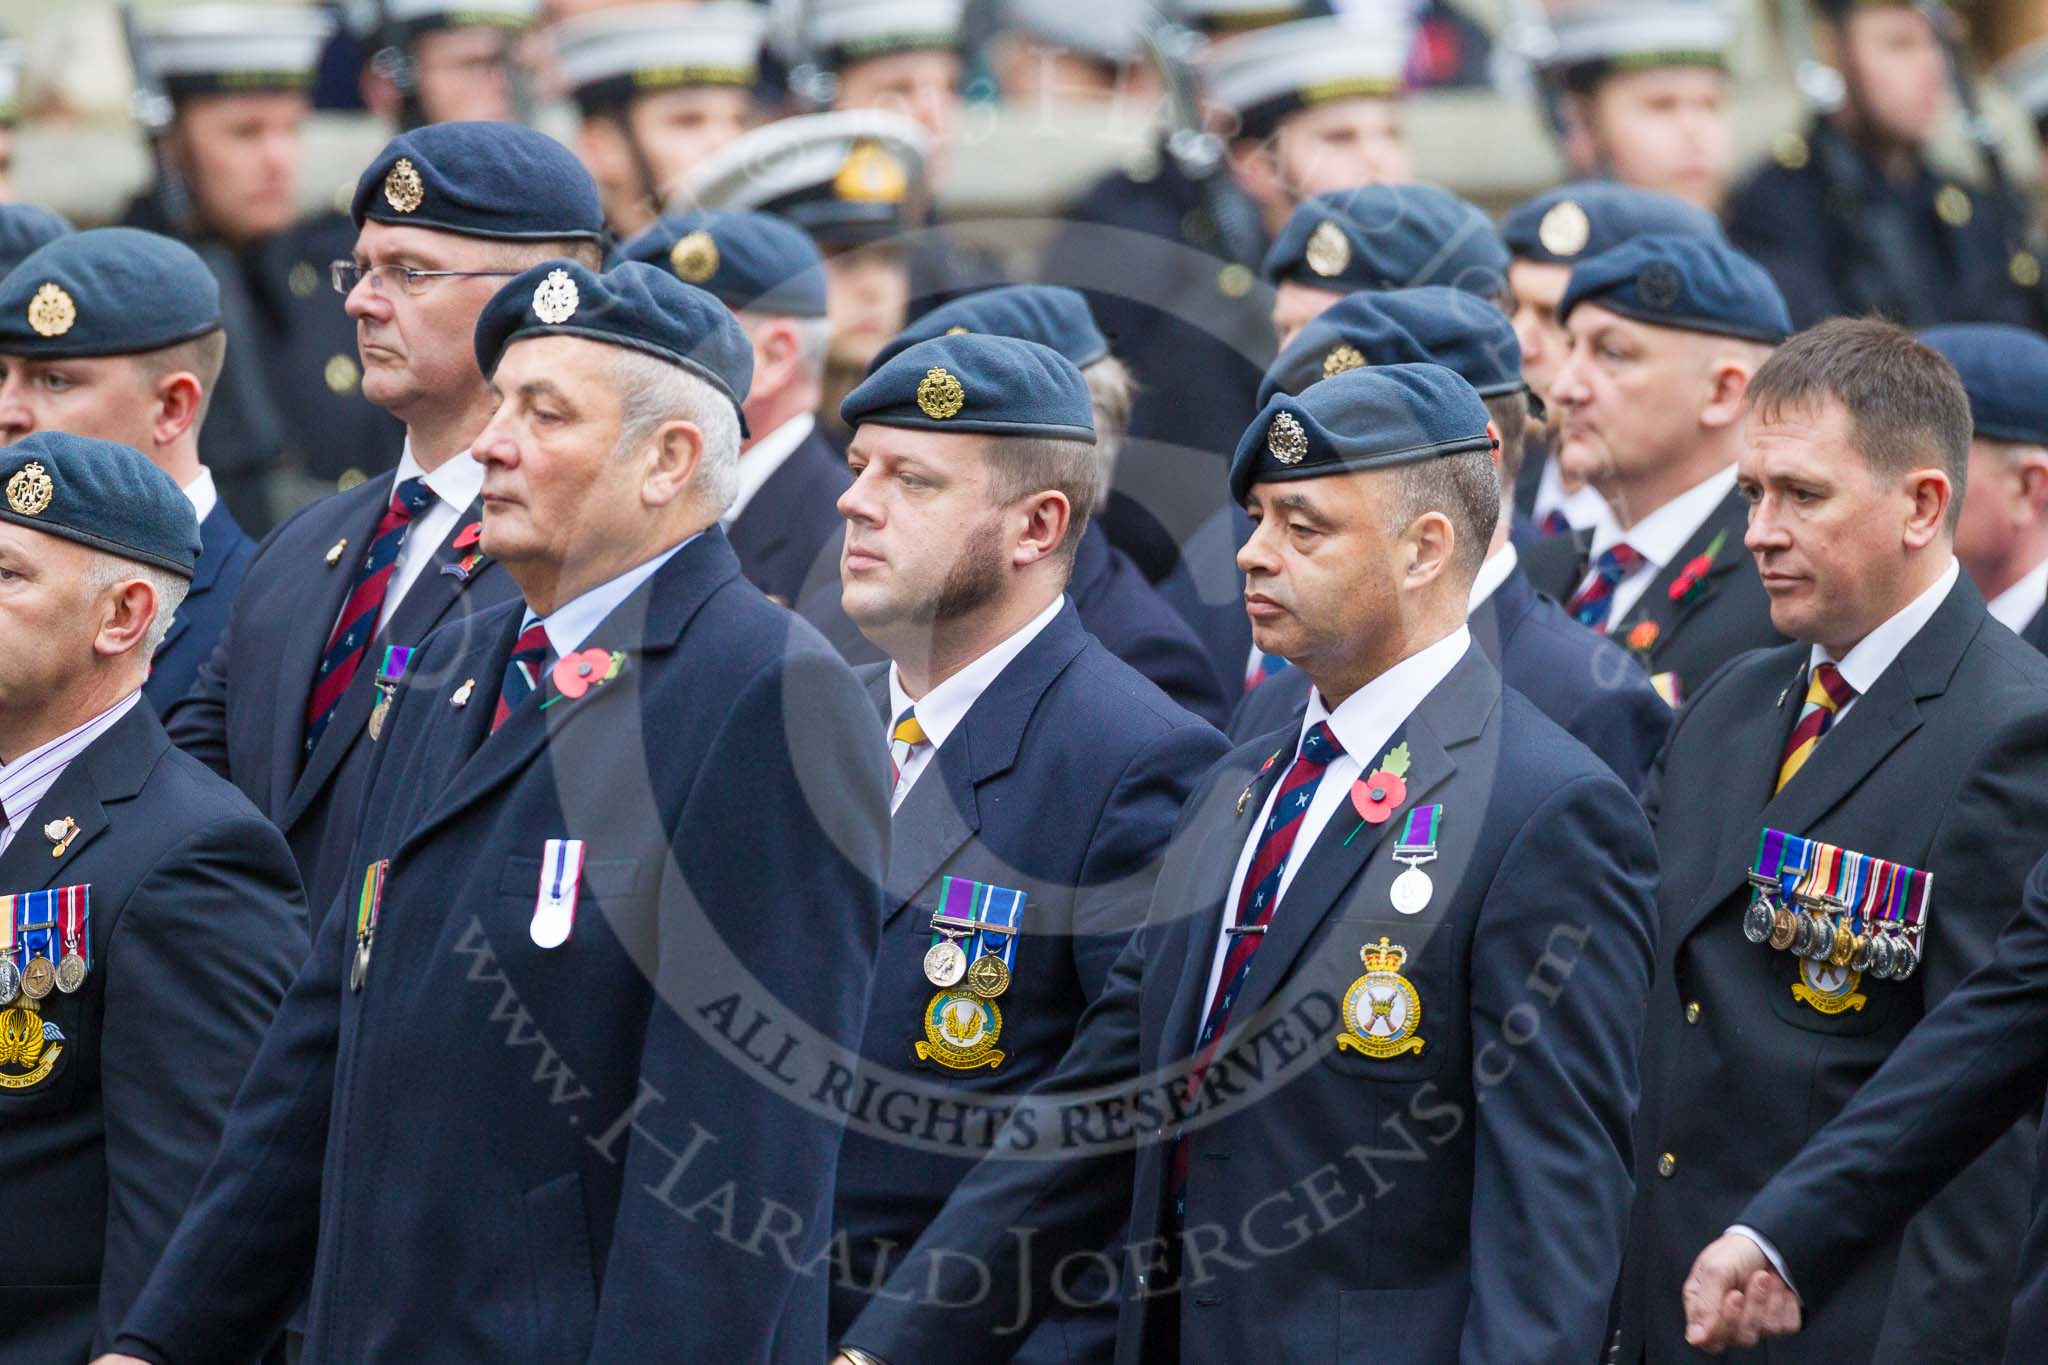 Remembrance Sunday at the Cenotaph 2015: C2, Royal Air Force Regiment Association.
Cenotaph, Whitehall, London SW1,
London,
Greater London,
United Kingdom,
on 08 November 2015 at 11:47, image #419